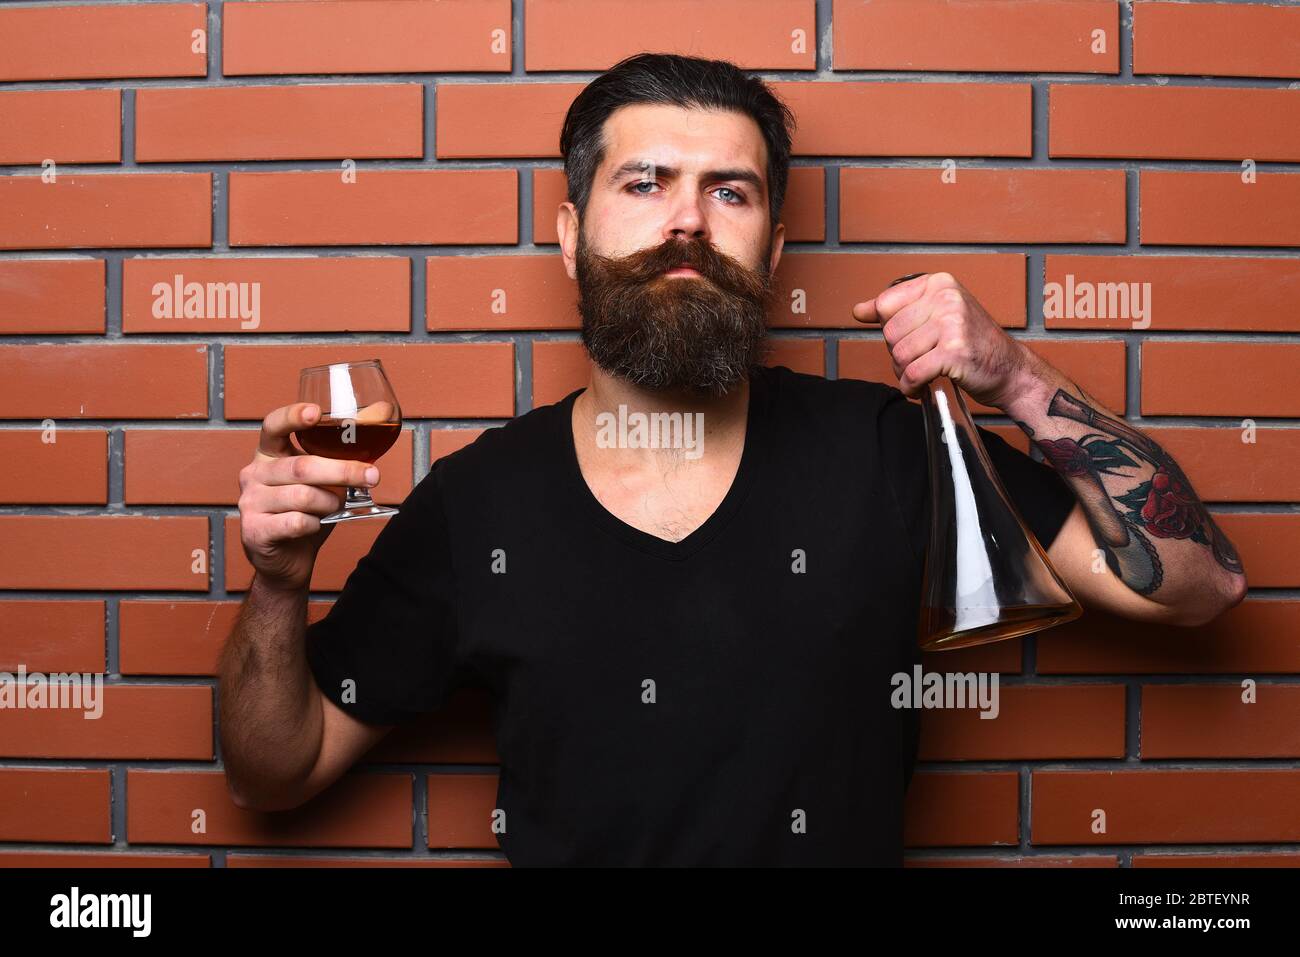 Man with beard and mustache holds alcoholic beverage on brick wall background. Guy with glass and bottle of cognac. Macho with confident face drinks brandy or whiskey. Service and catering concept. Stock Photo